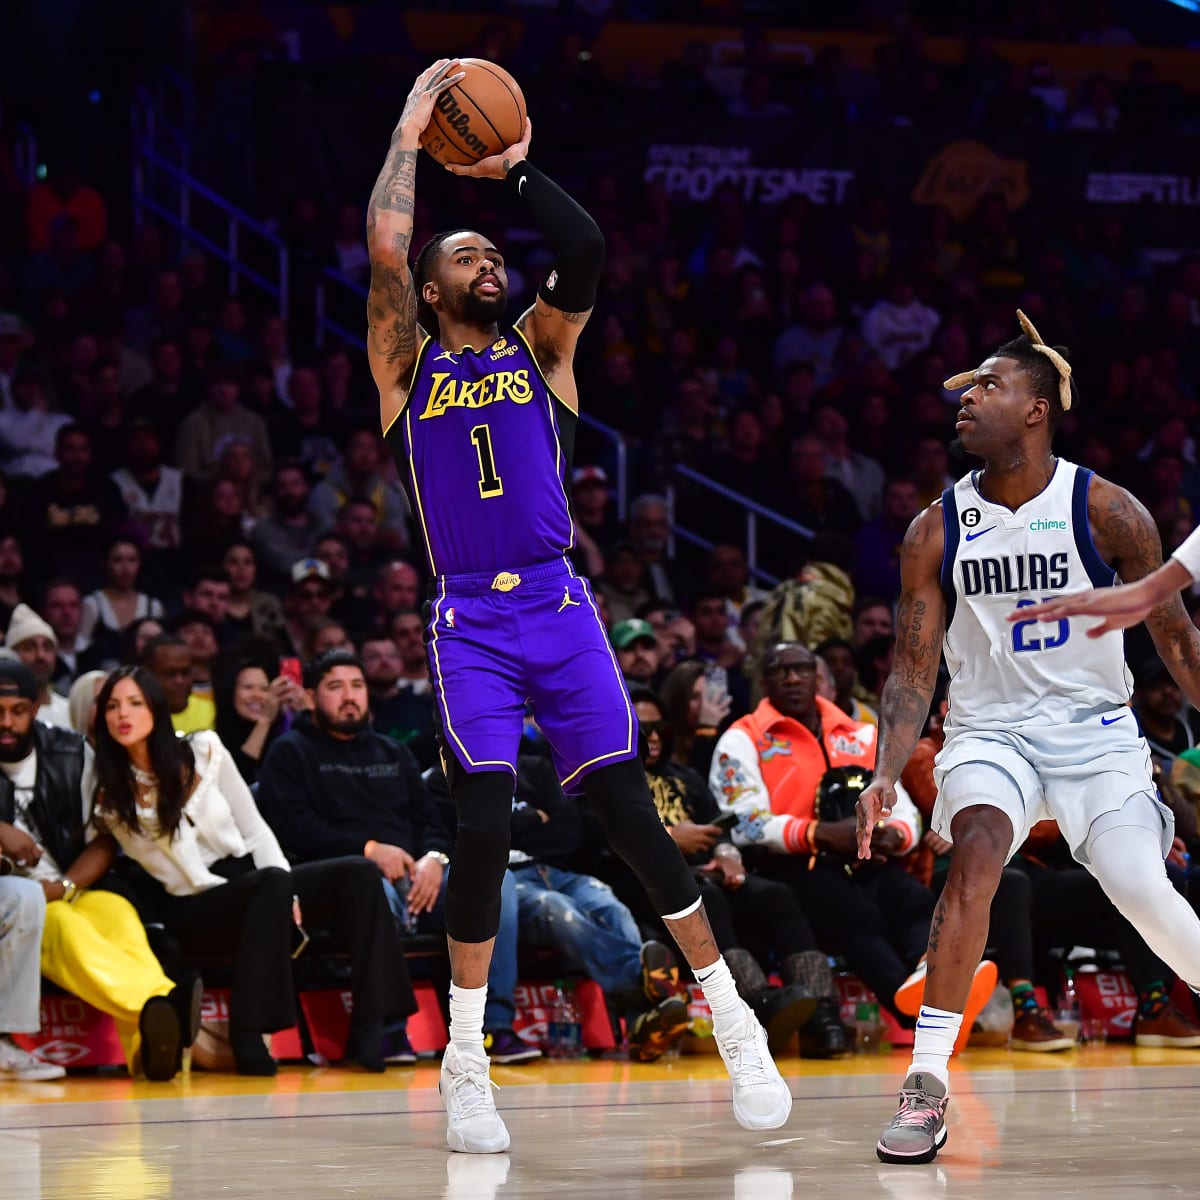 Disregard for locker room rules by Los Angeles Lakers' D'Angelo